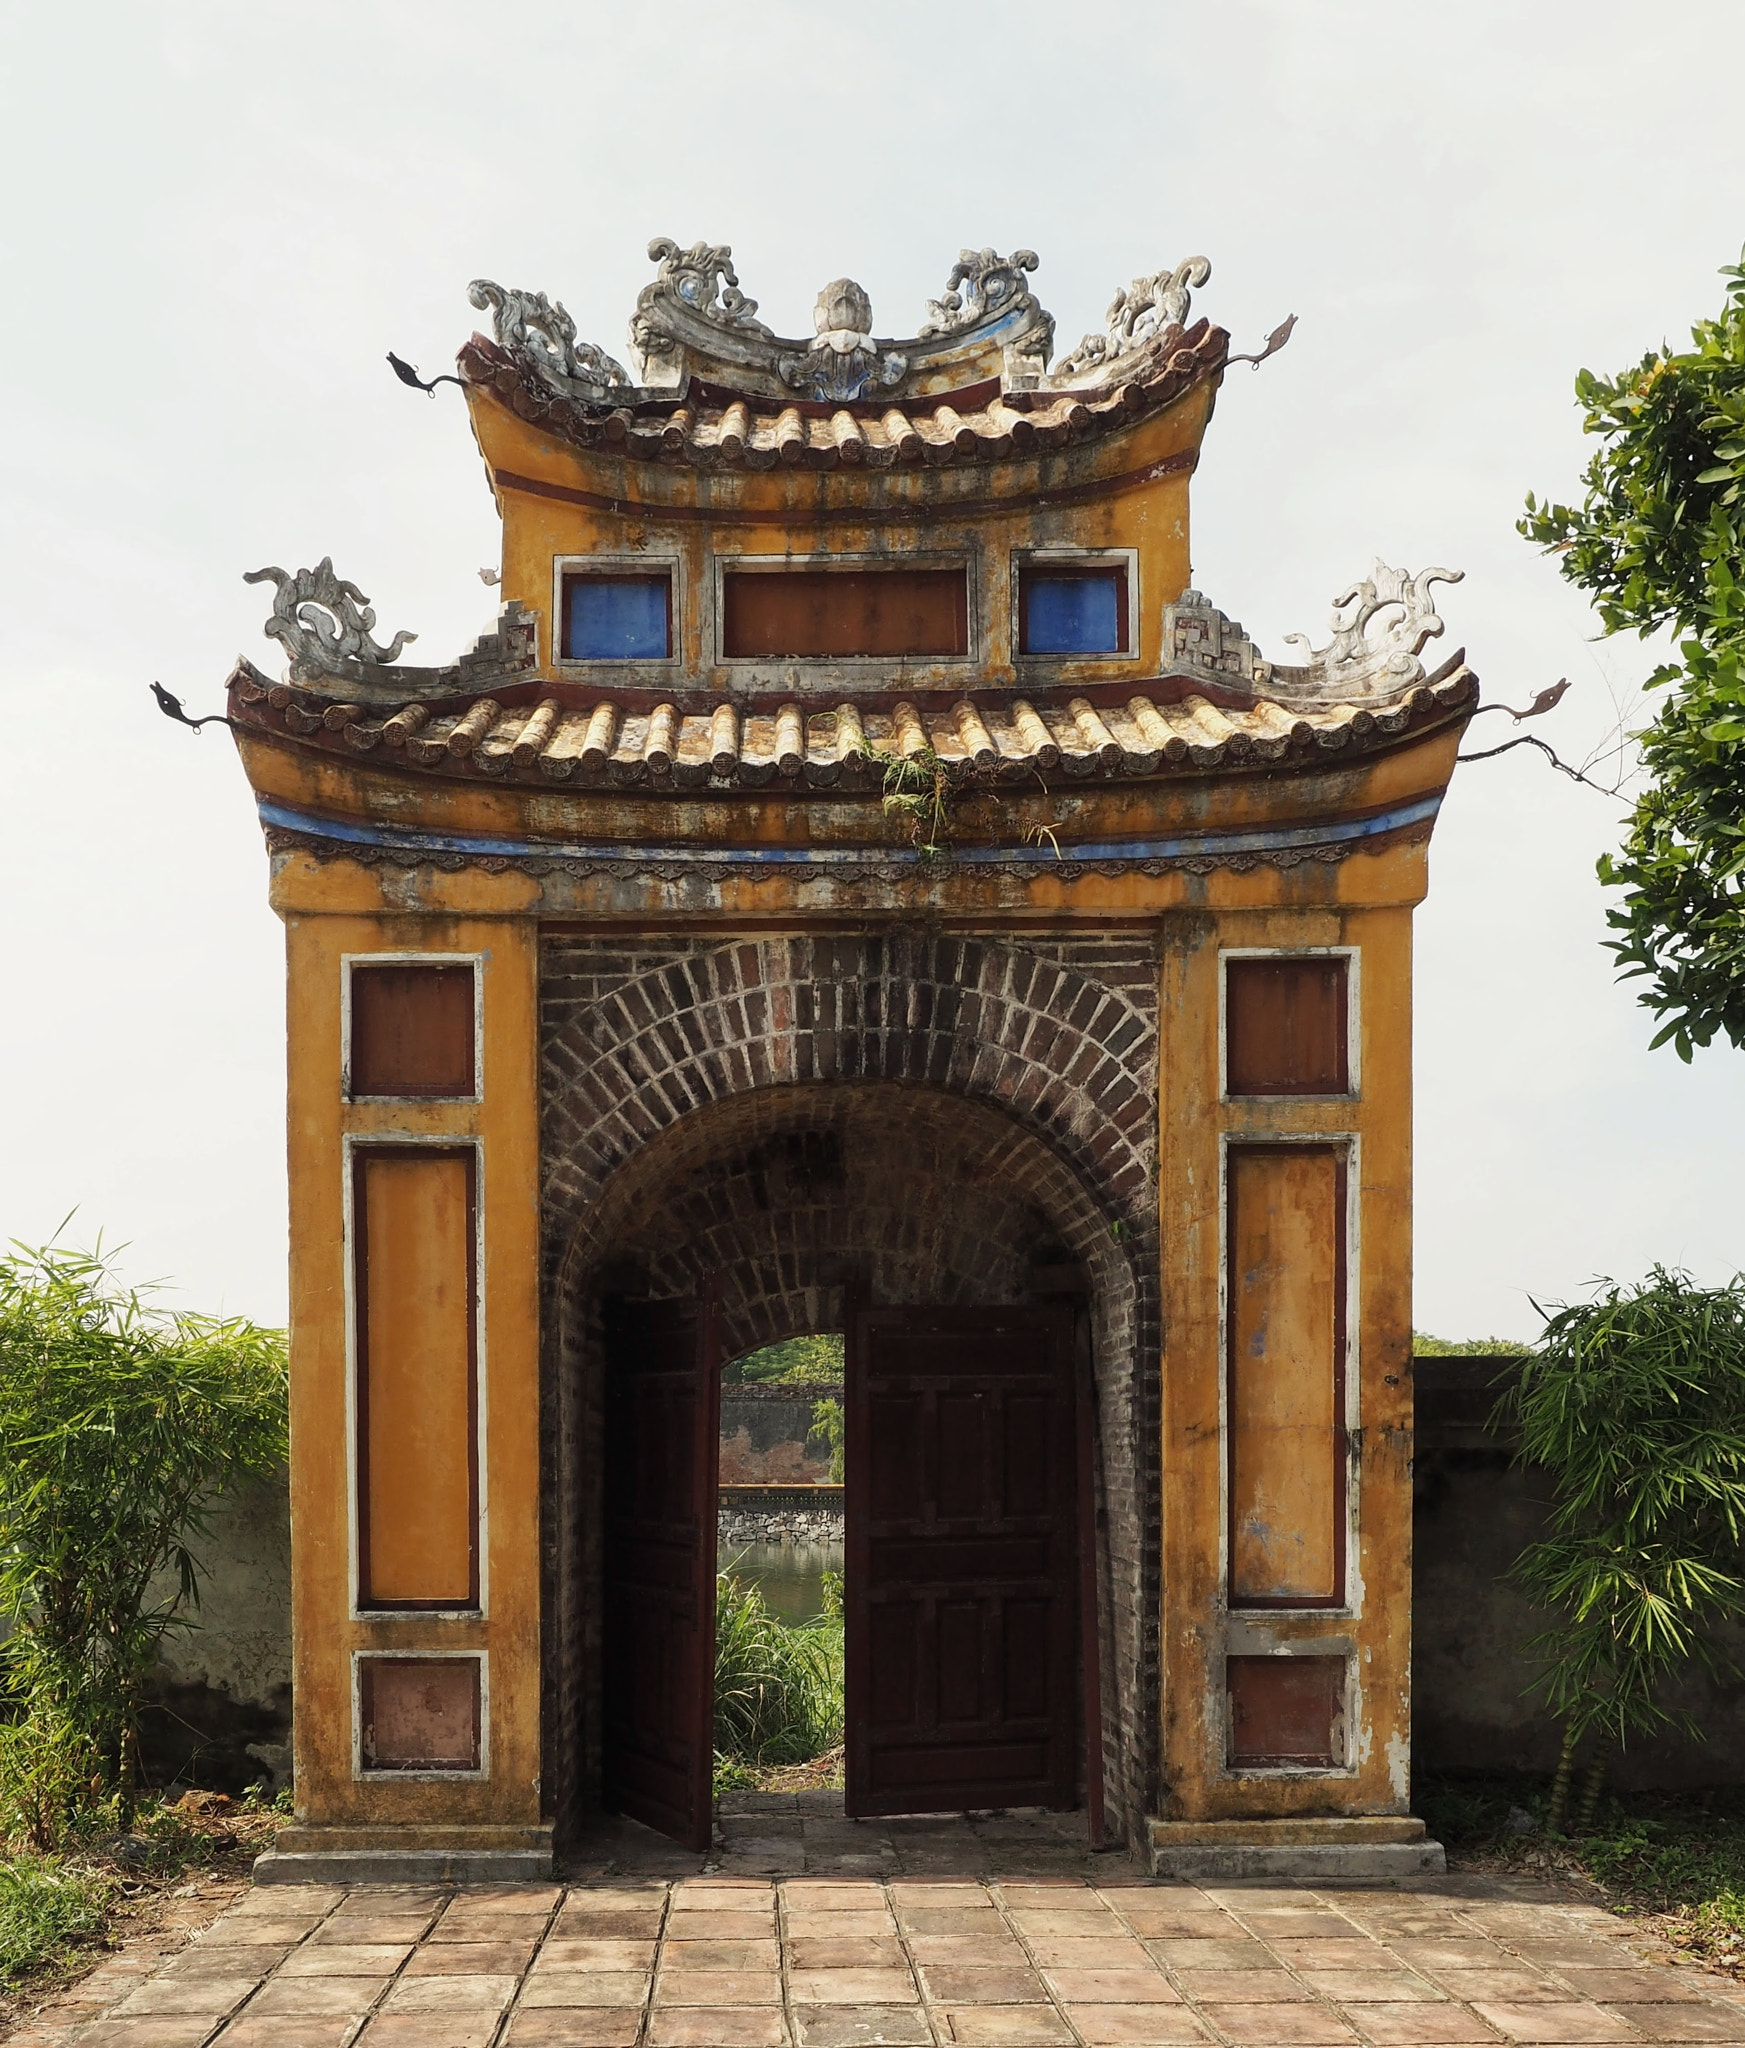 Gates at imperial city in Hue